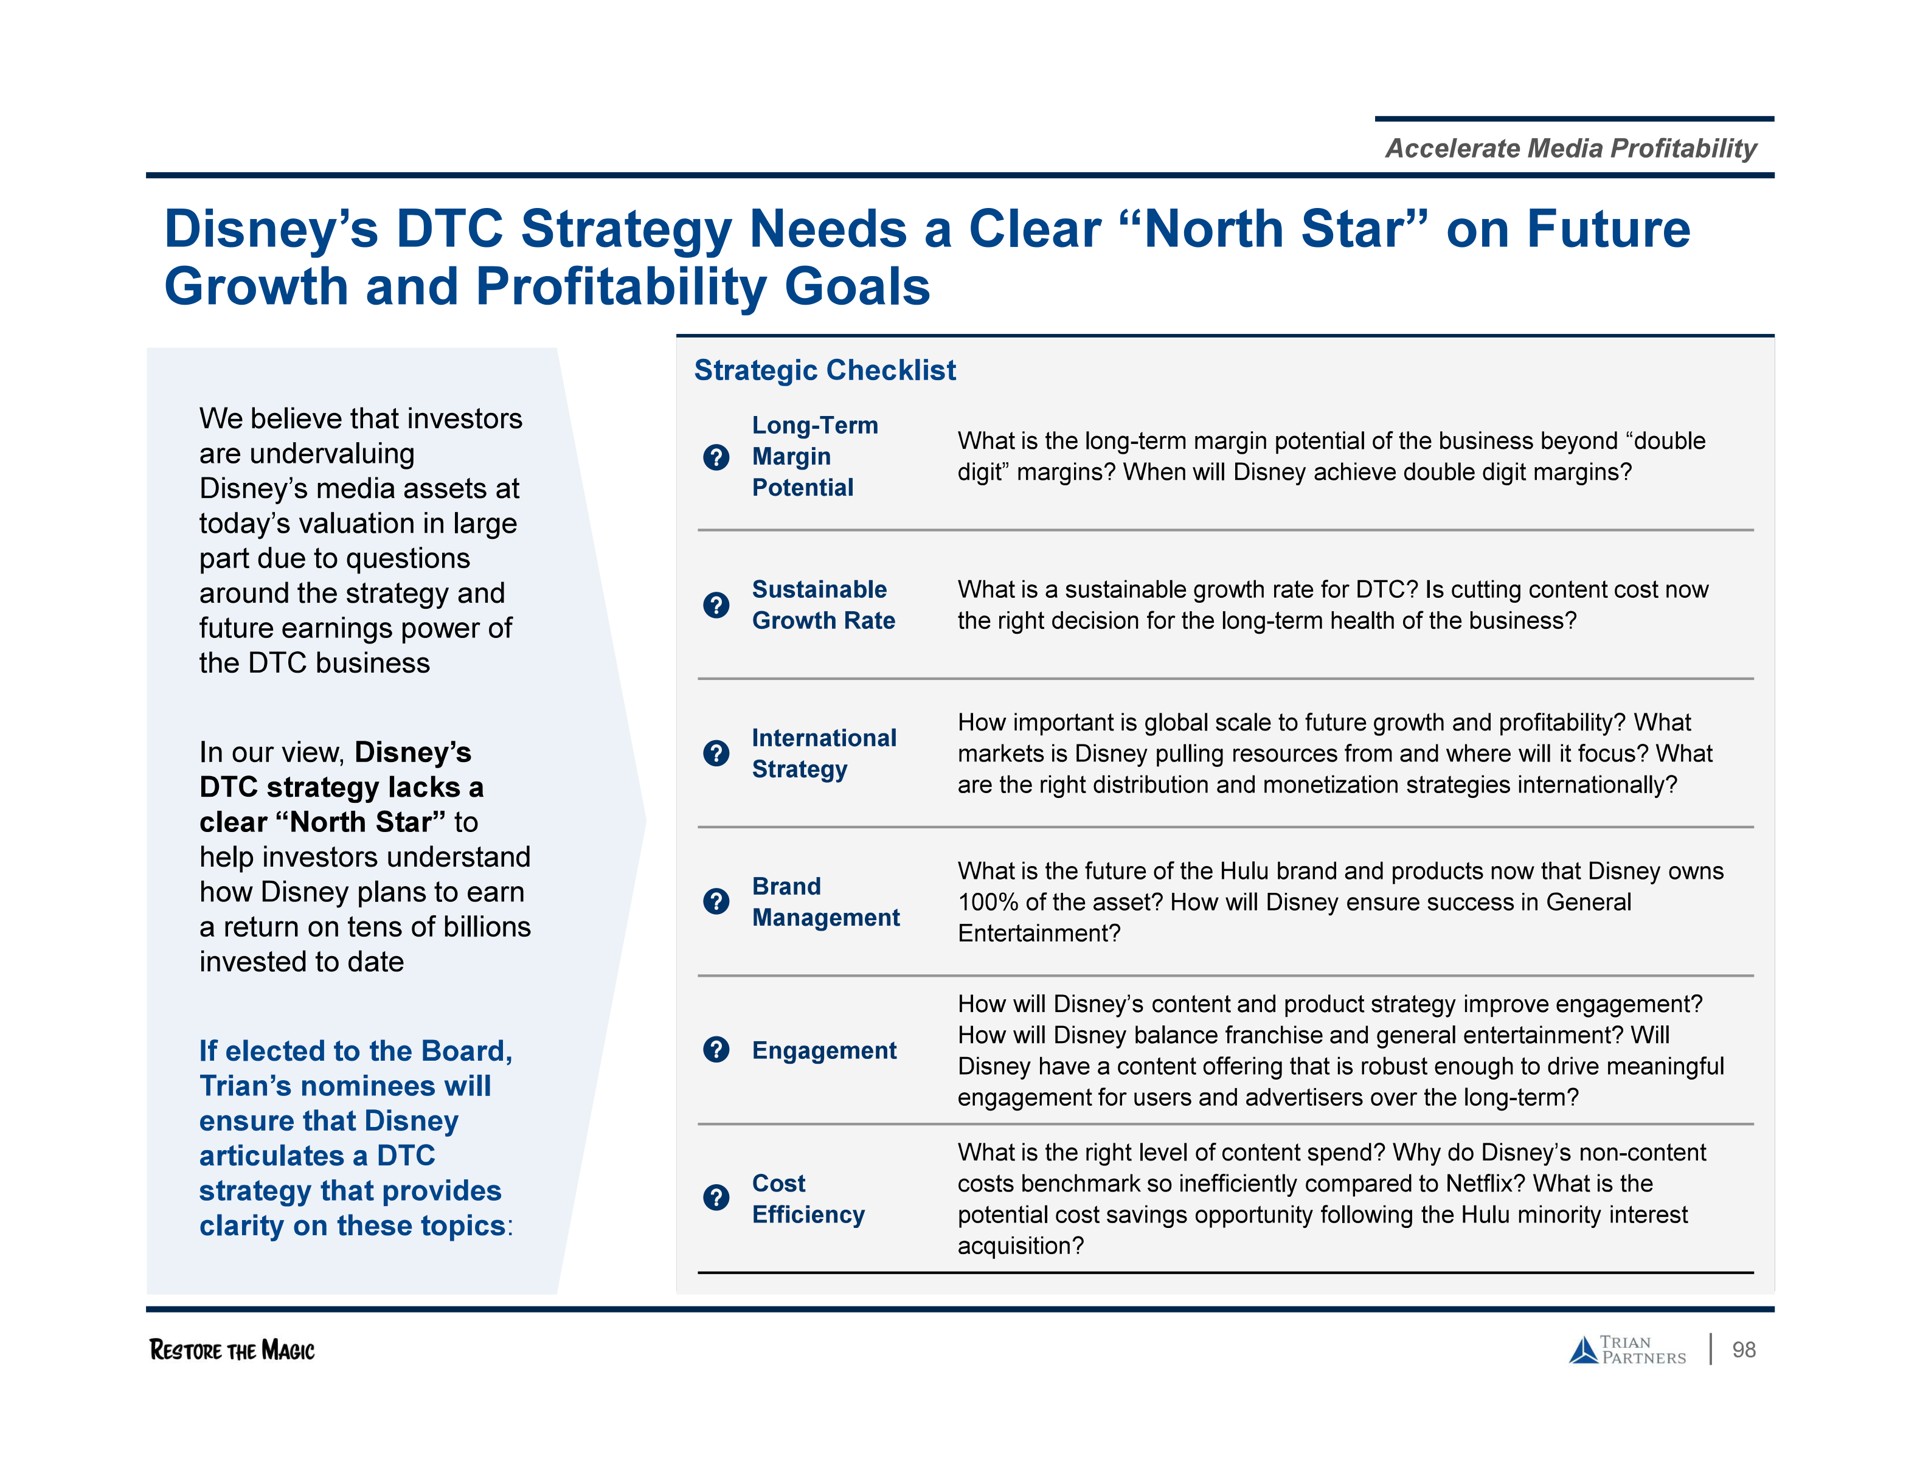 strategy needs a clear north star on future growth and profitability goals | Trian Partners